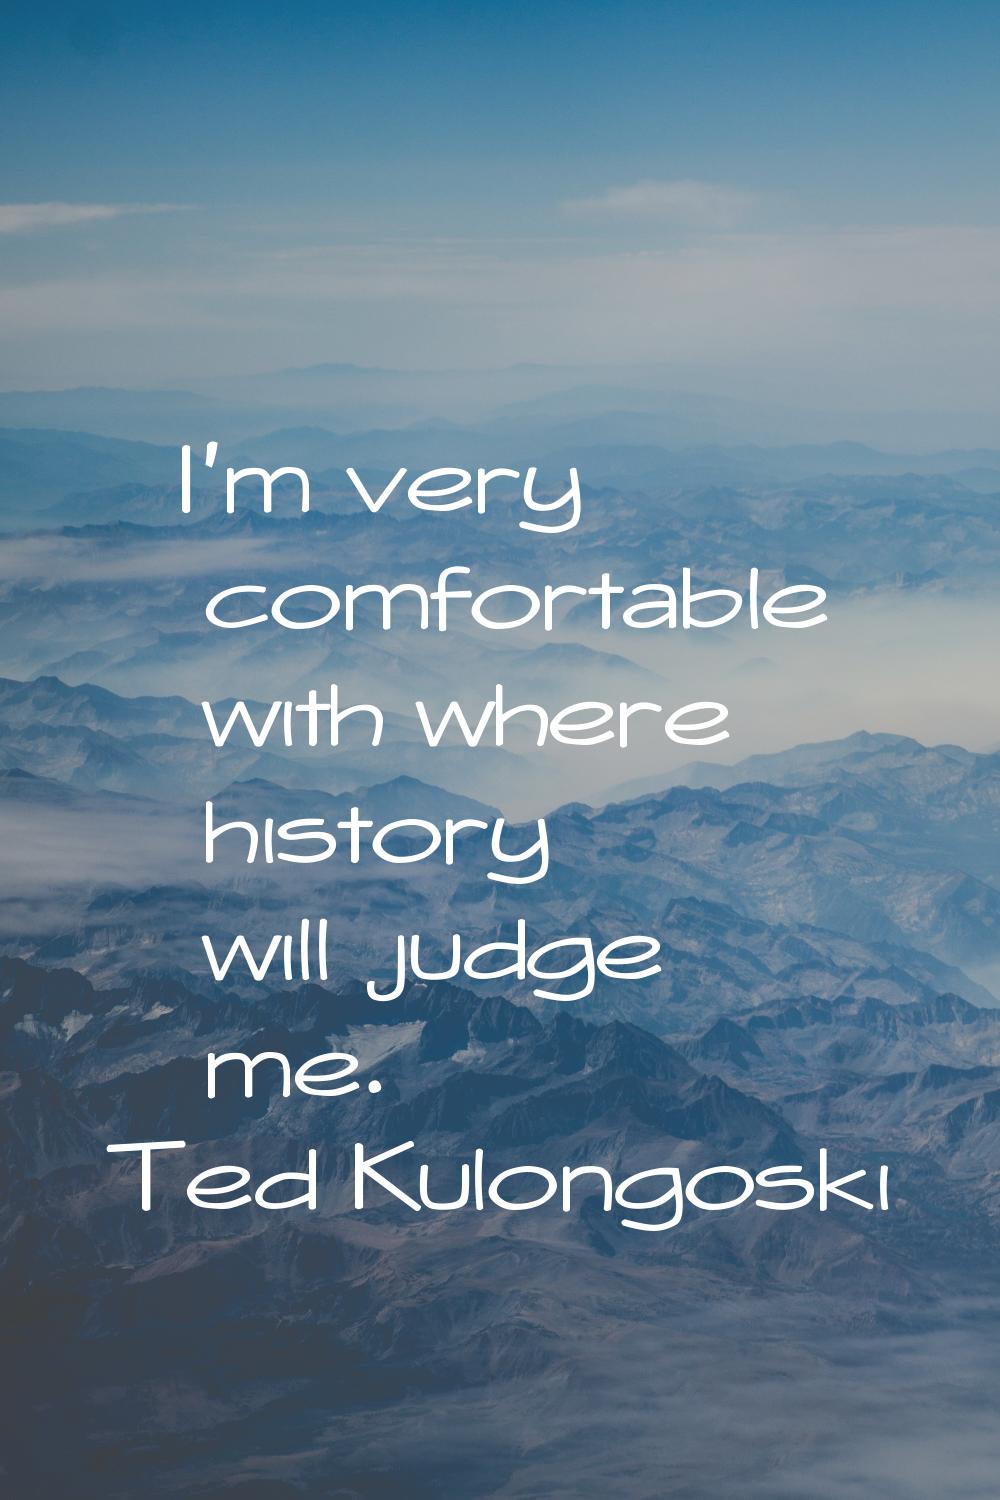 I'm very comfortable with where history will judge me.